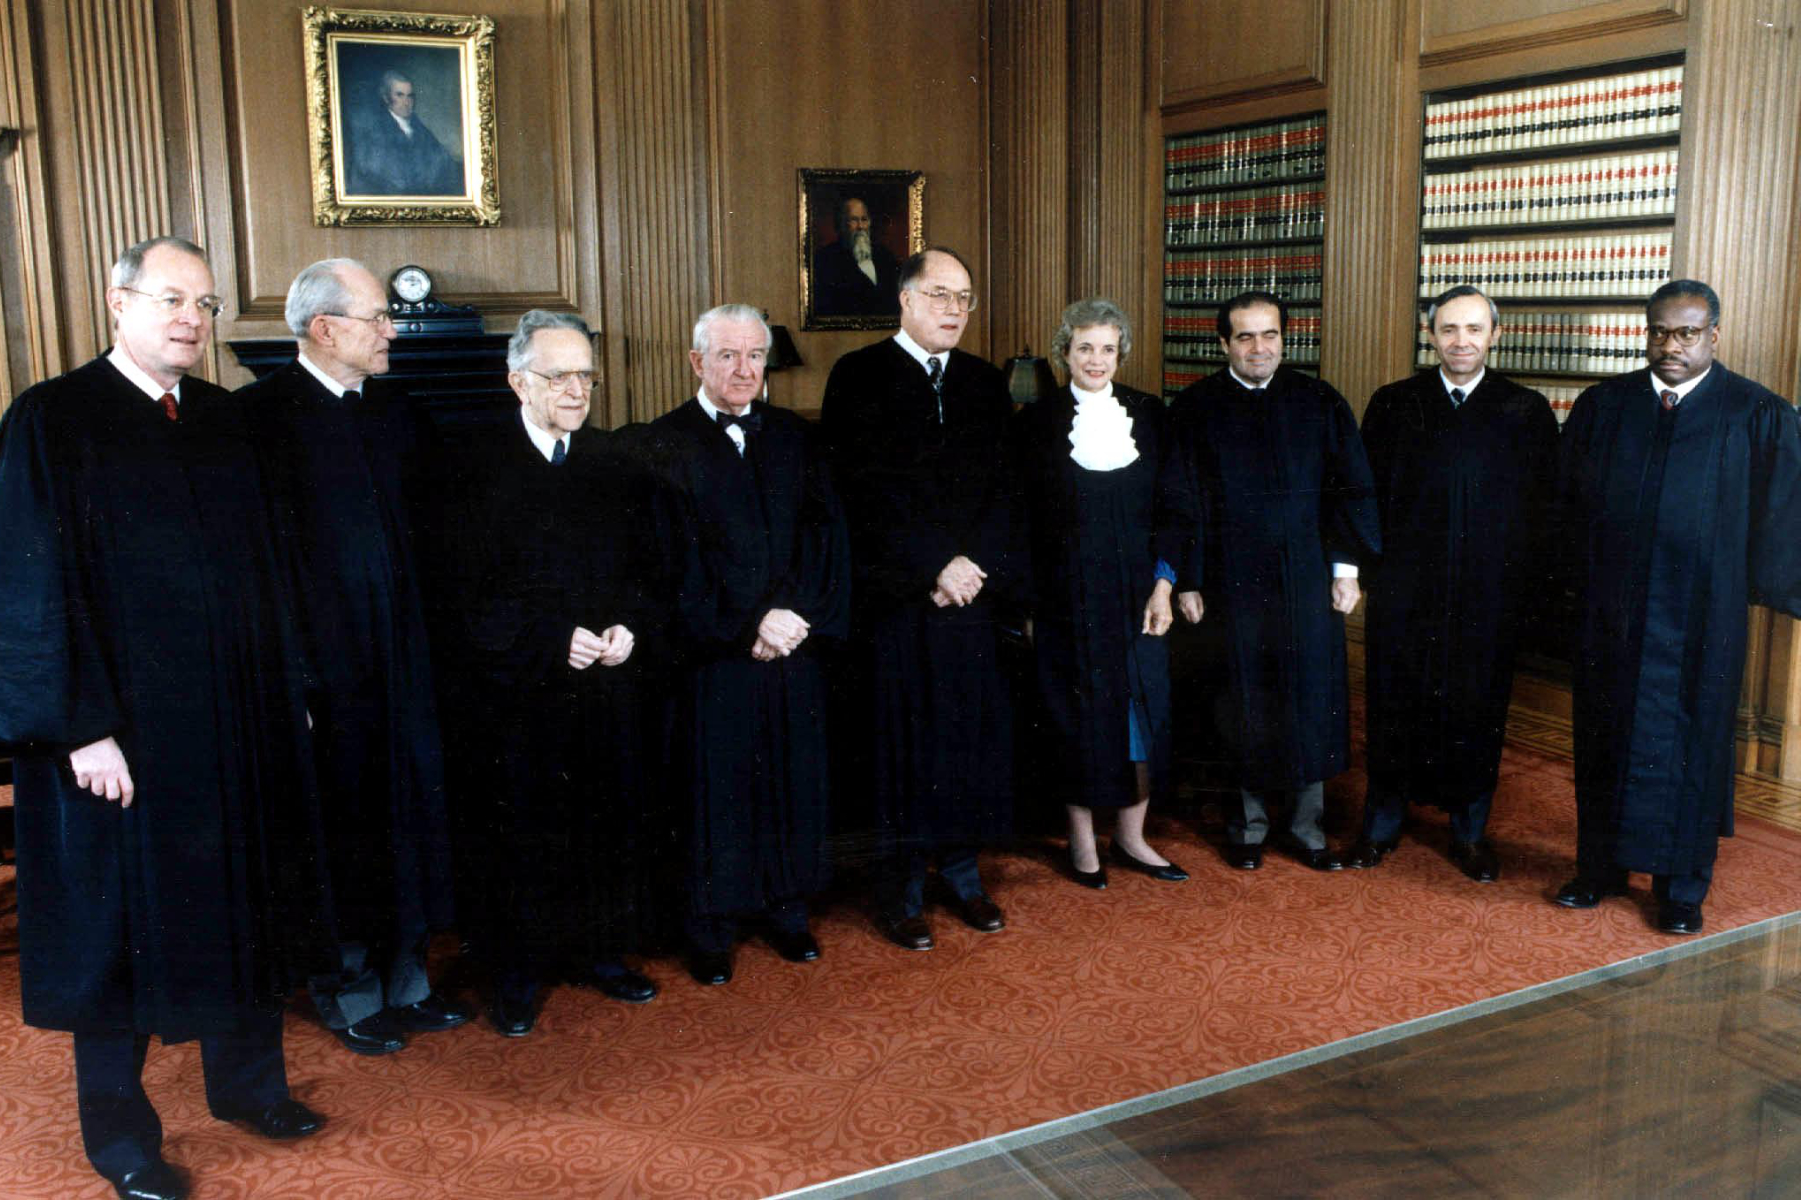 From left to right, Anthony M. Kennedy, Byron R. White, Harry M. Blackmun, John Paul Stevens, Chief Justice William H. Rehnquist, Sandra Day O'Connor, Antonin Scalia, David H. Souter and associate justice Clarence Thomas.